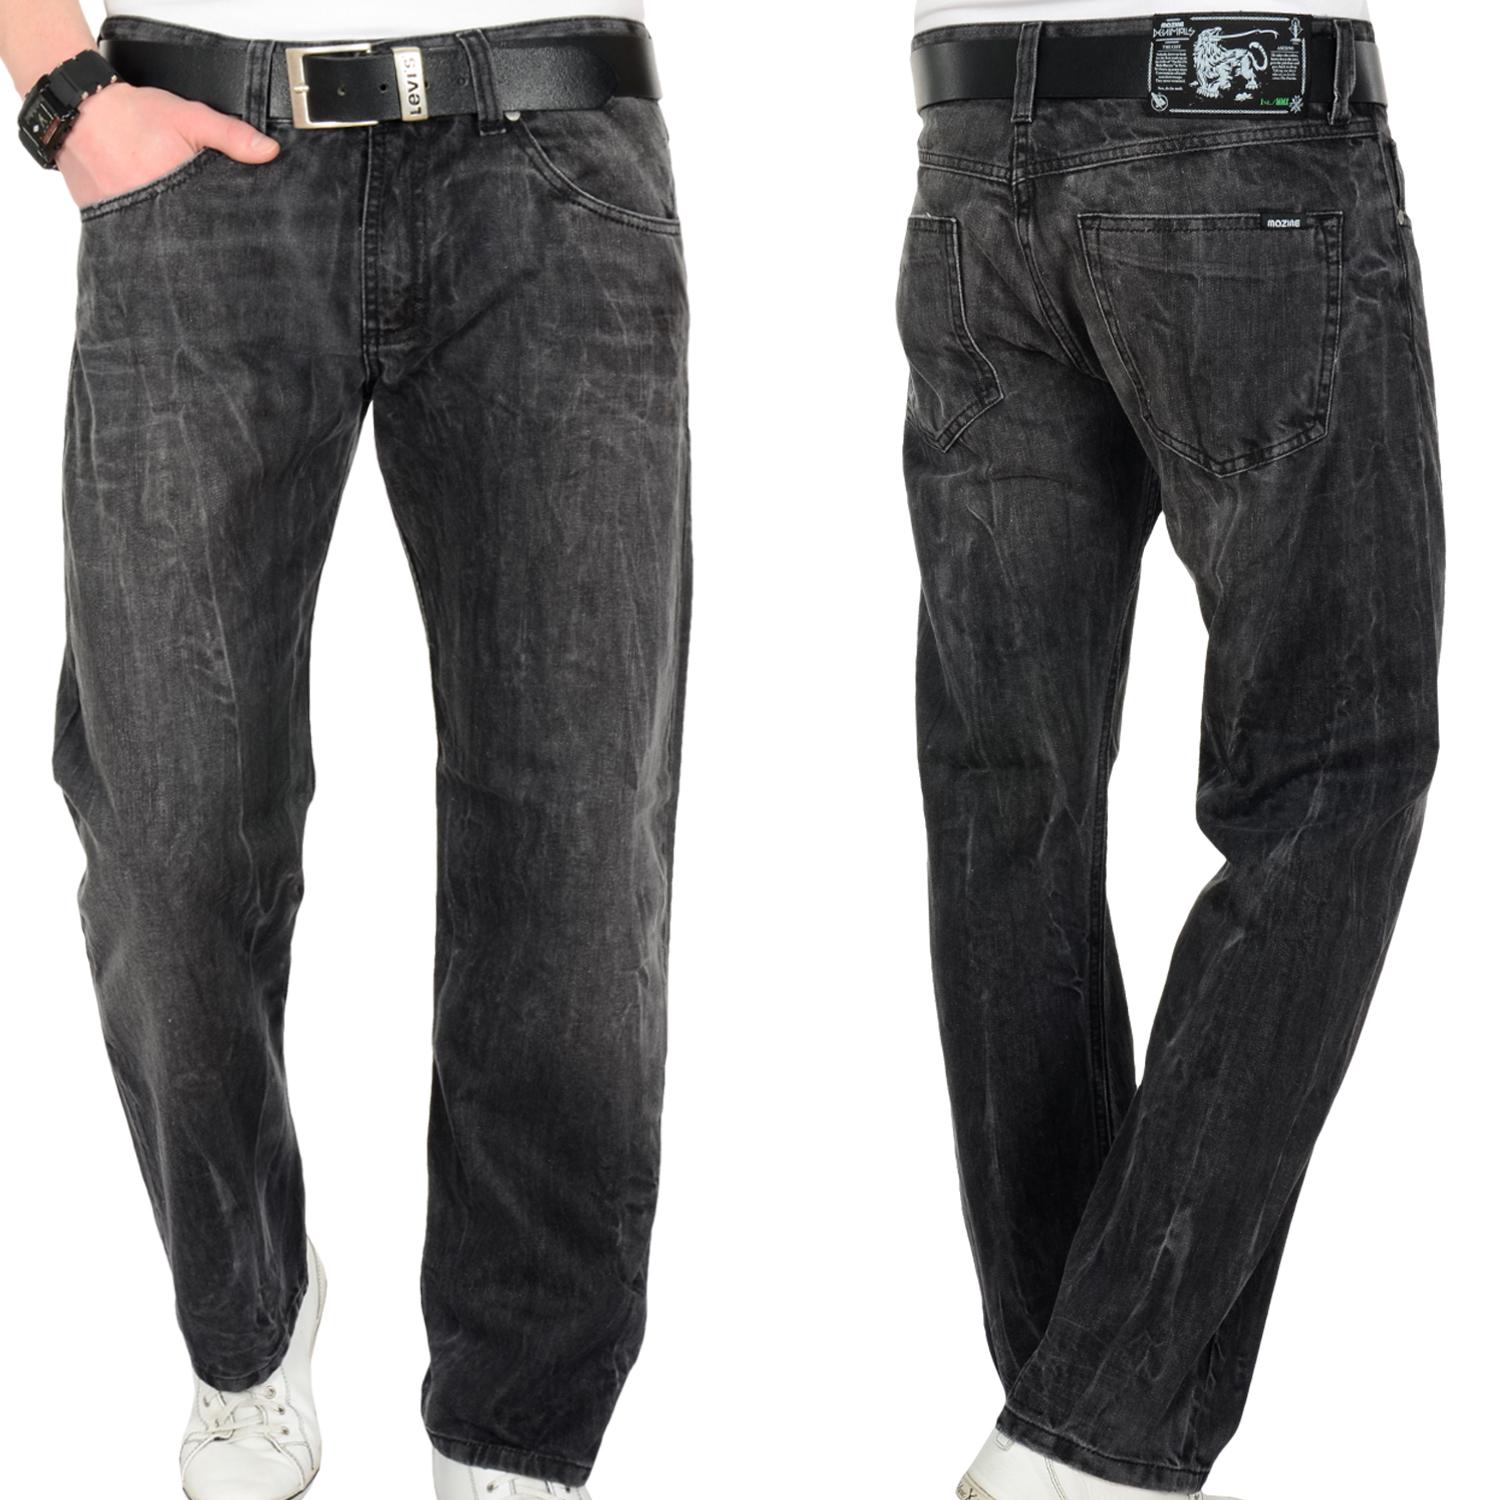 Foto Mazine Asesino Claim Male Loose Fit Jeans Negro